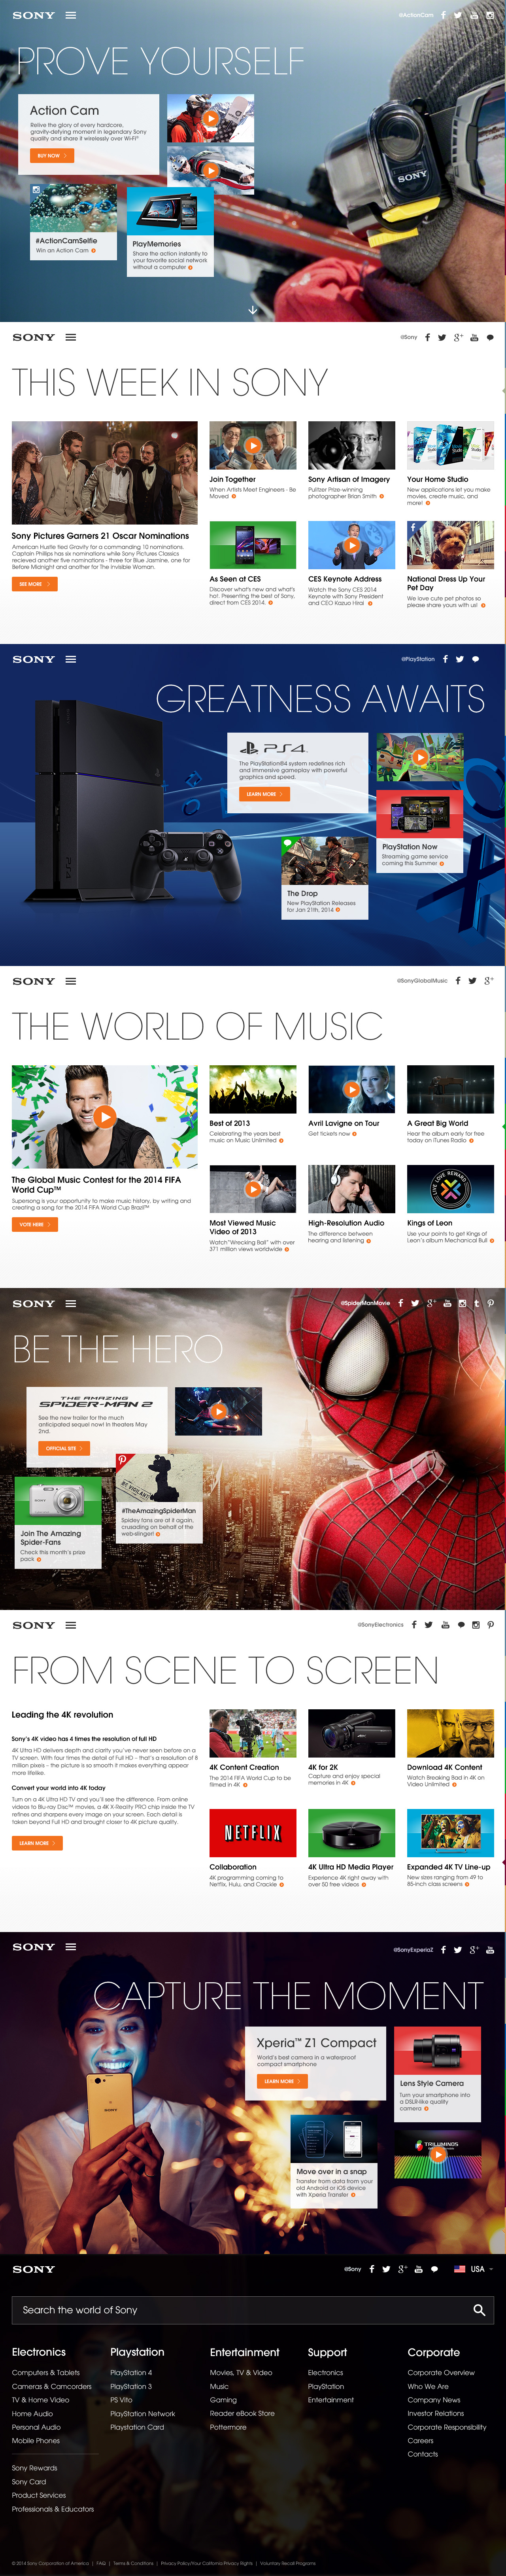 Sony home page